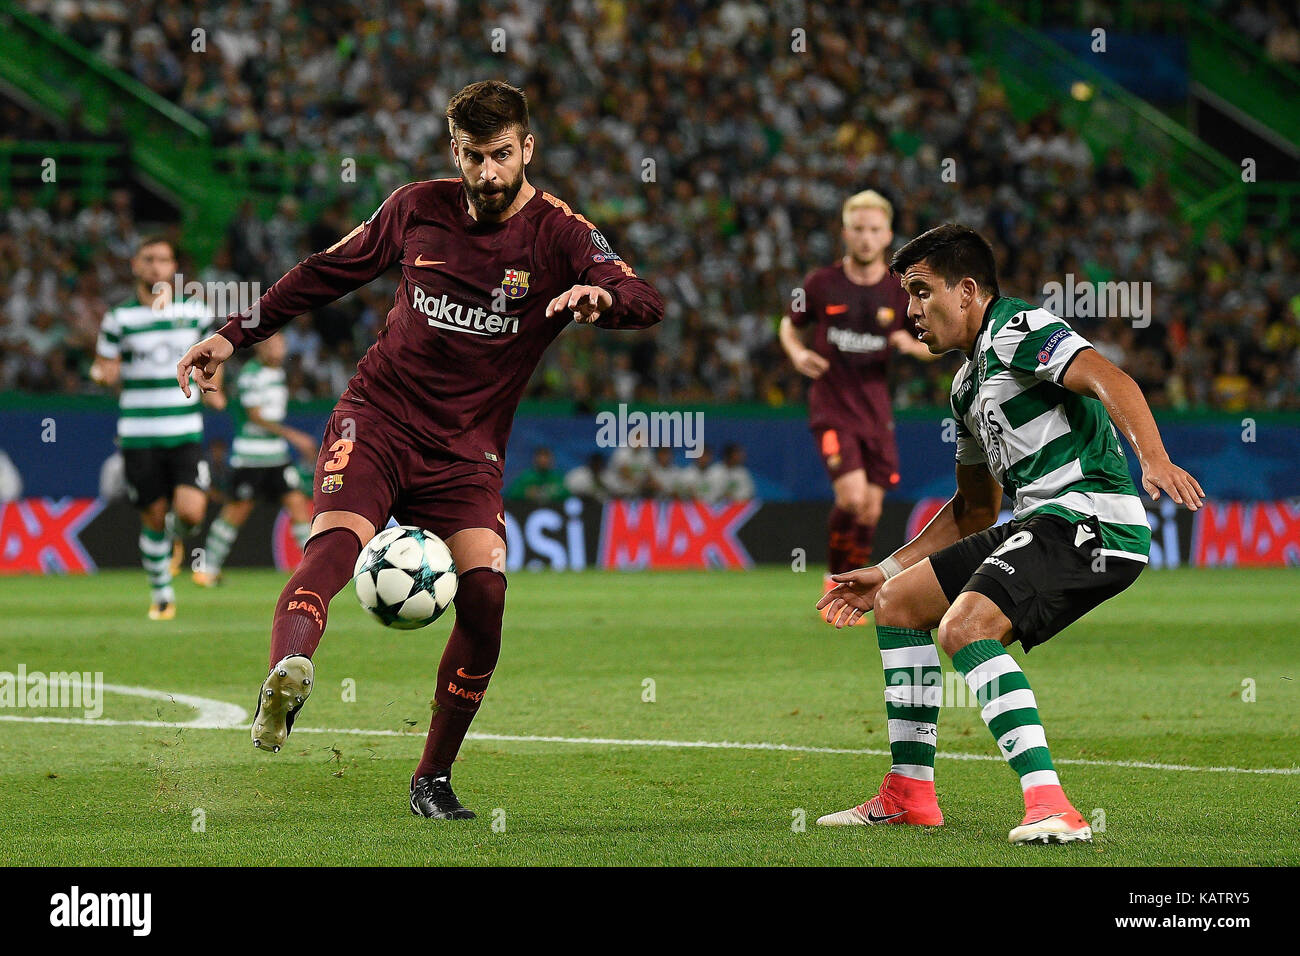 Lisbon, Portugal. 27th Sep, 2017. Gerard Pique from FC Barcelona and Marcos Acuna from Sporting CP in action during UEFA CHAMPIONS LEAGUE football match from group D between Sporting CP and FC Barcelona in Alvalade Stadium on September 27, 2017 in Lisbon, Portugal. Credit: Bruno de Carvalho/Alamy Live News Stock Photo